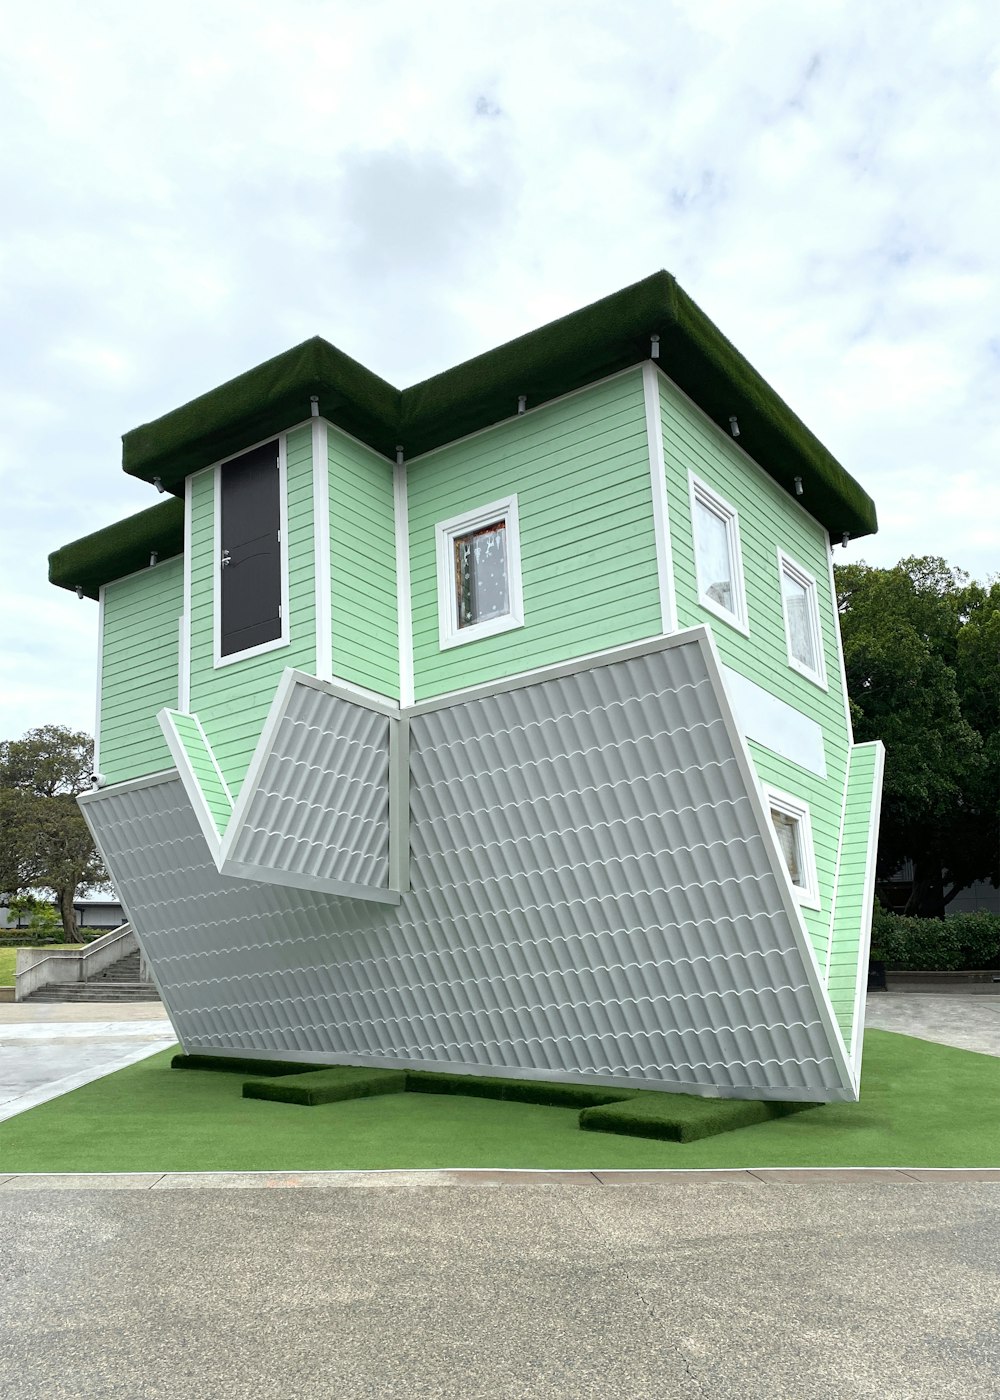 a house that is upside down on the ground